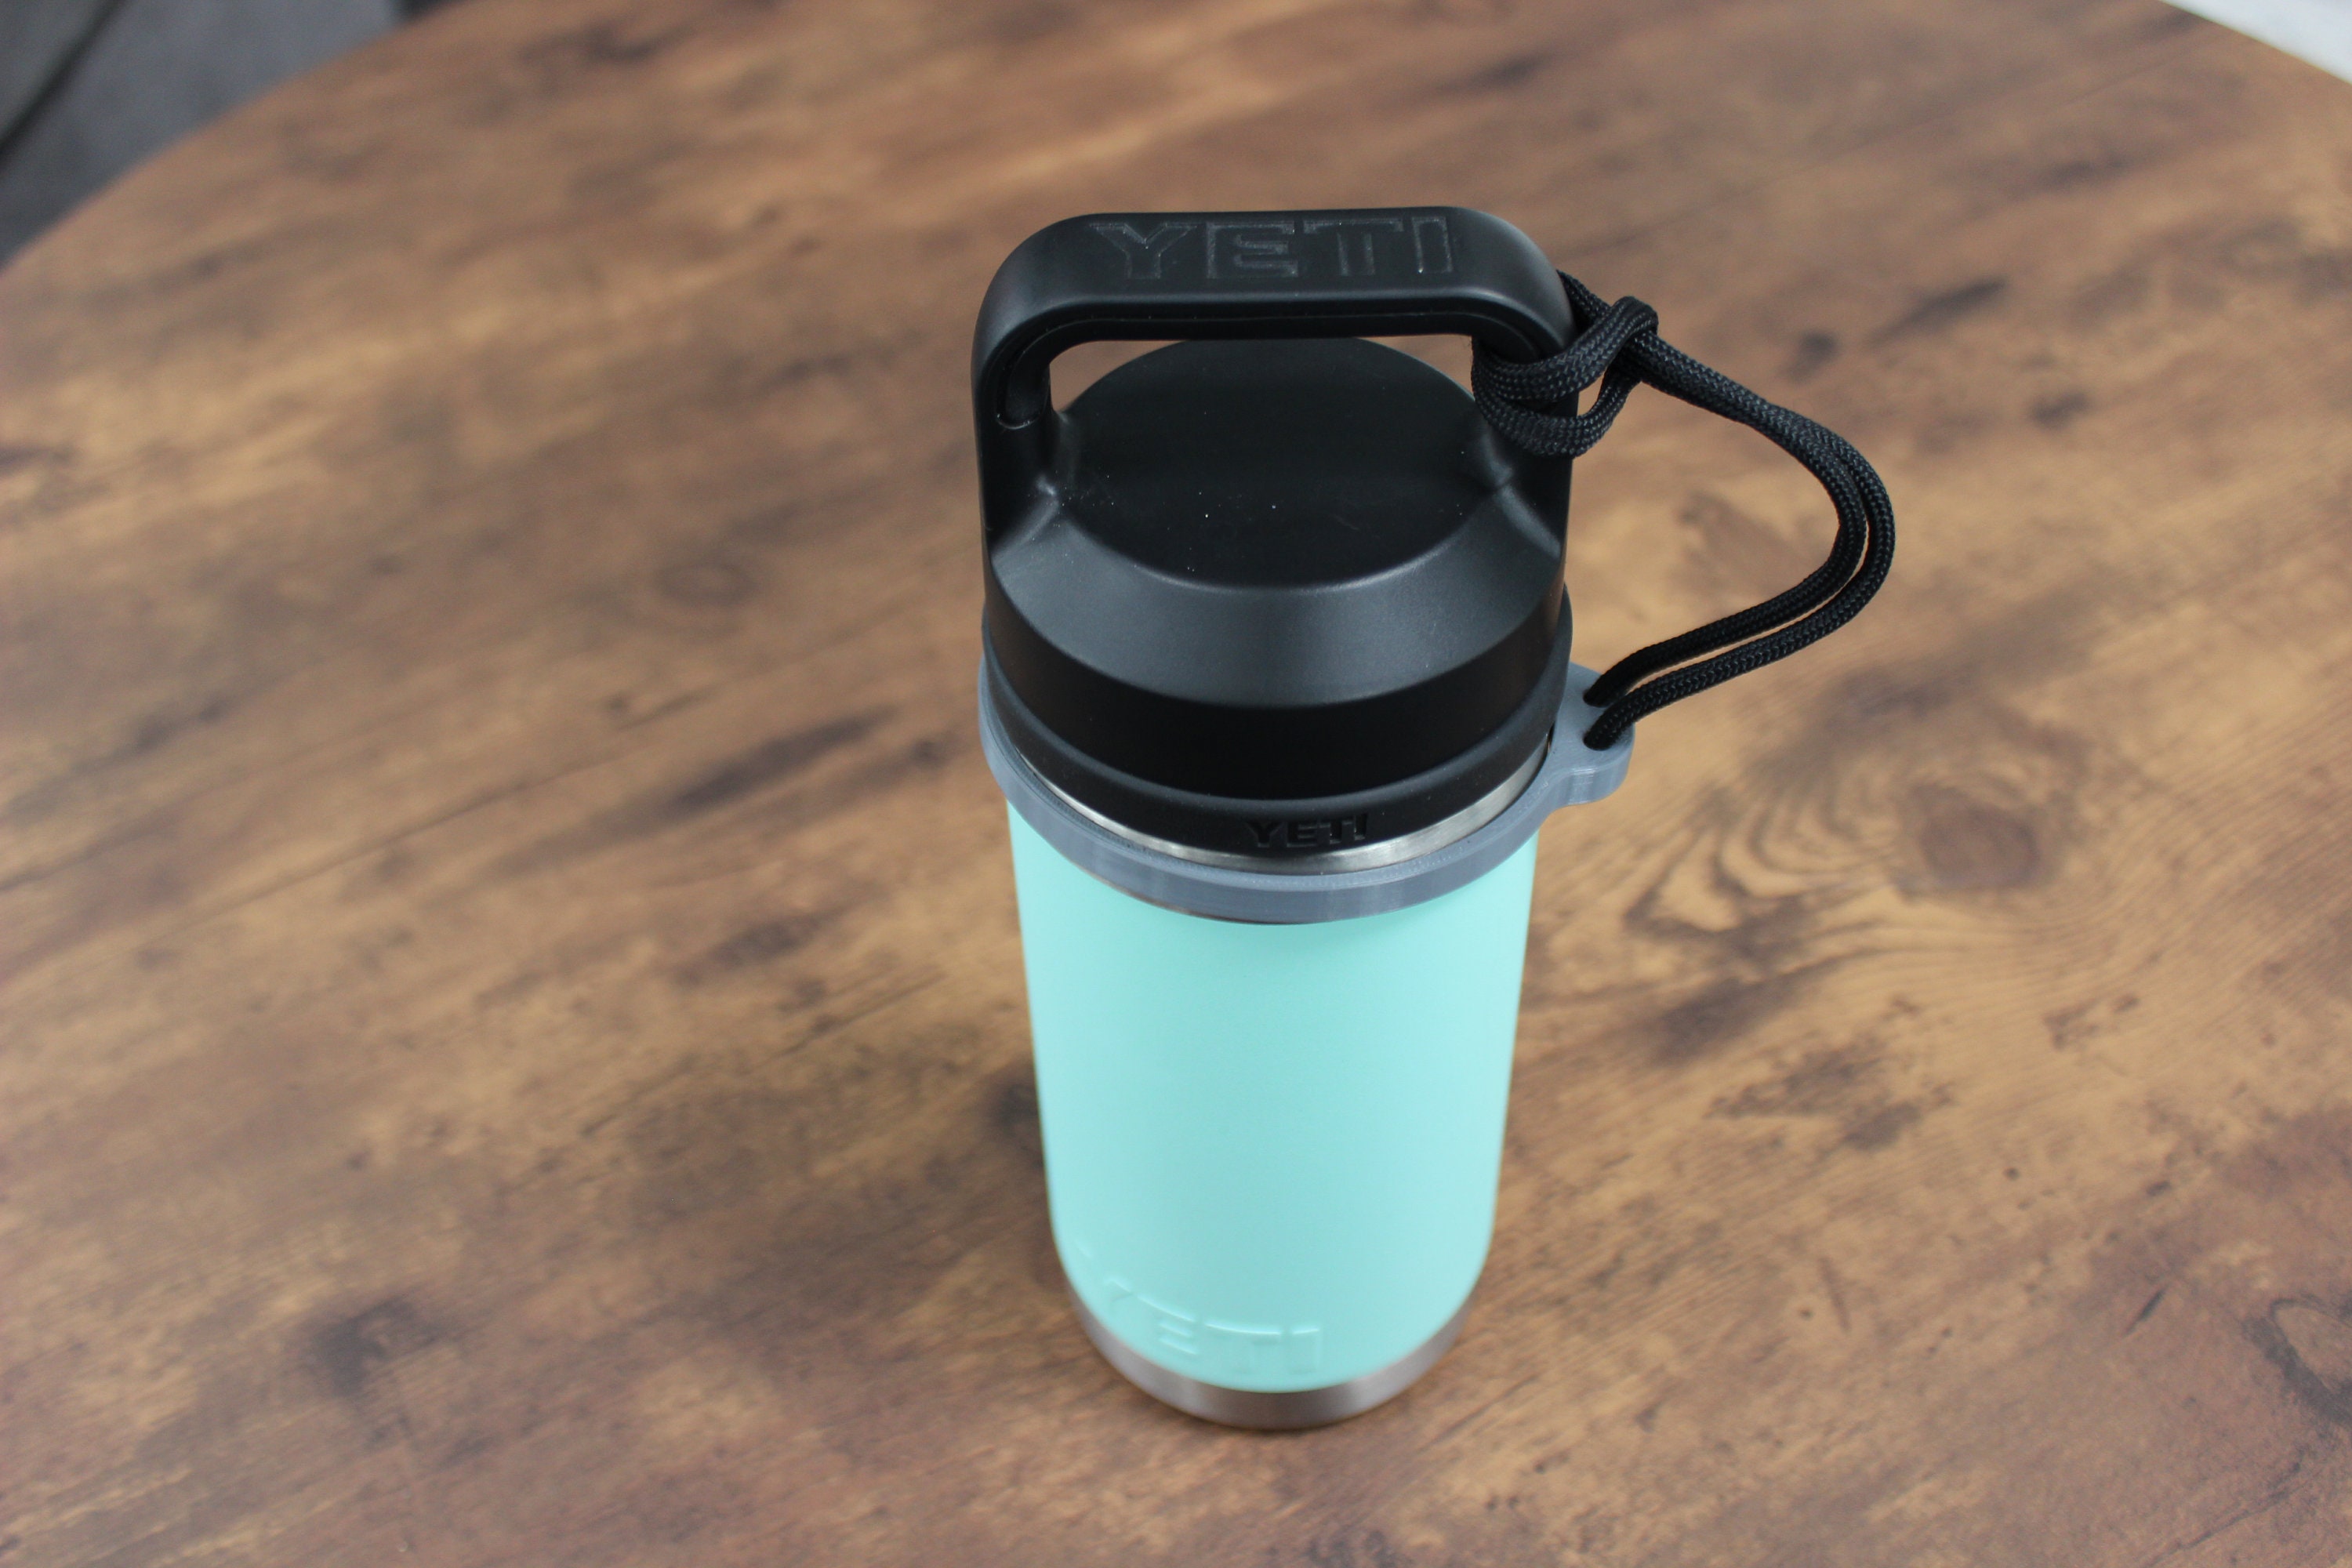 I've Used it for Years! YETI Rambler 18oz Bottle with Straw Cap